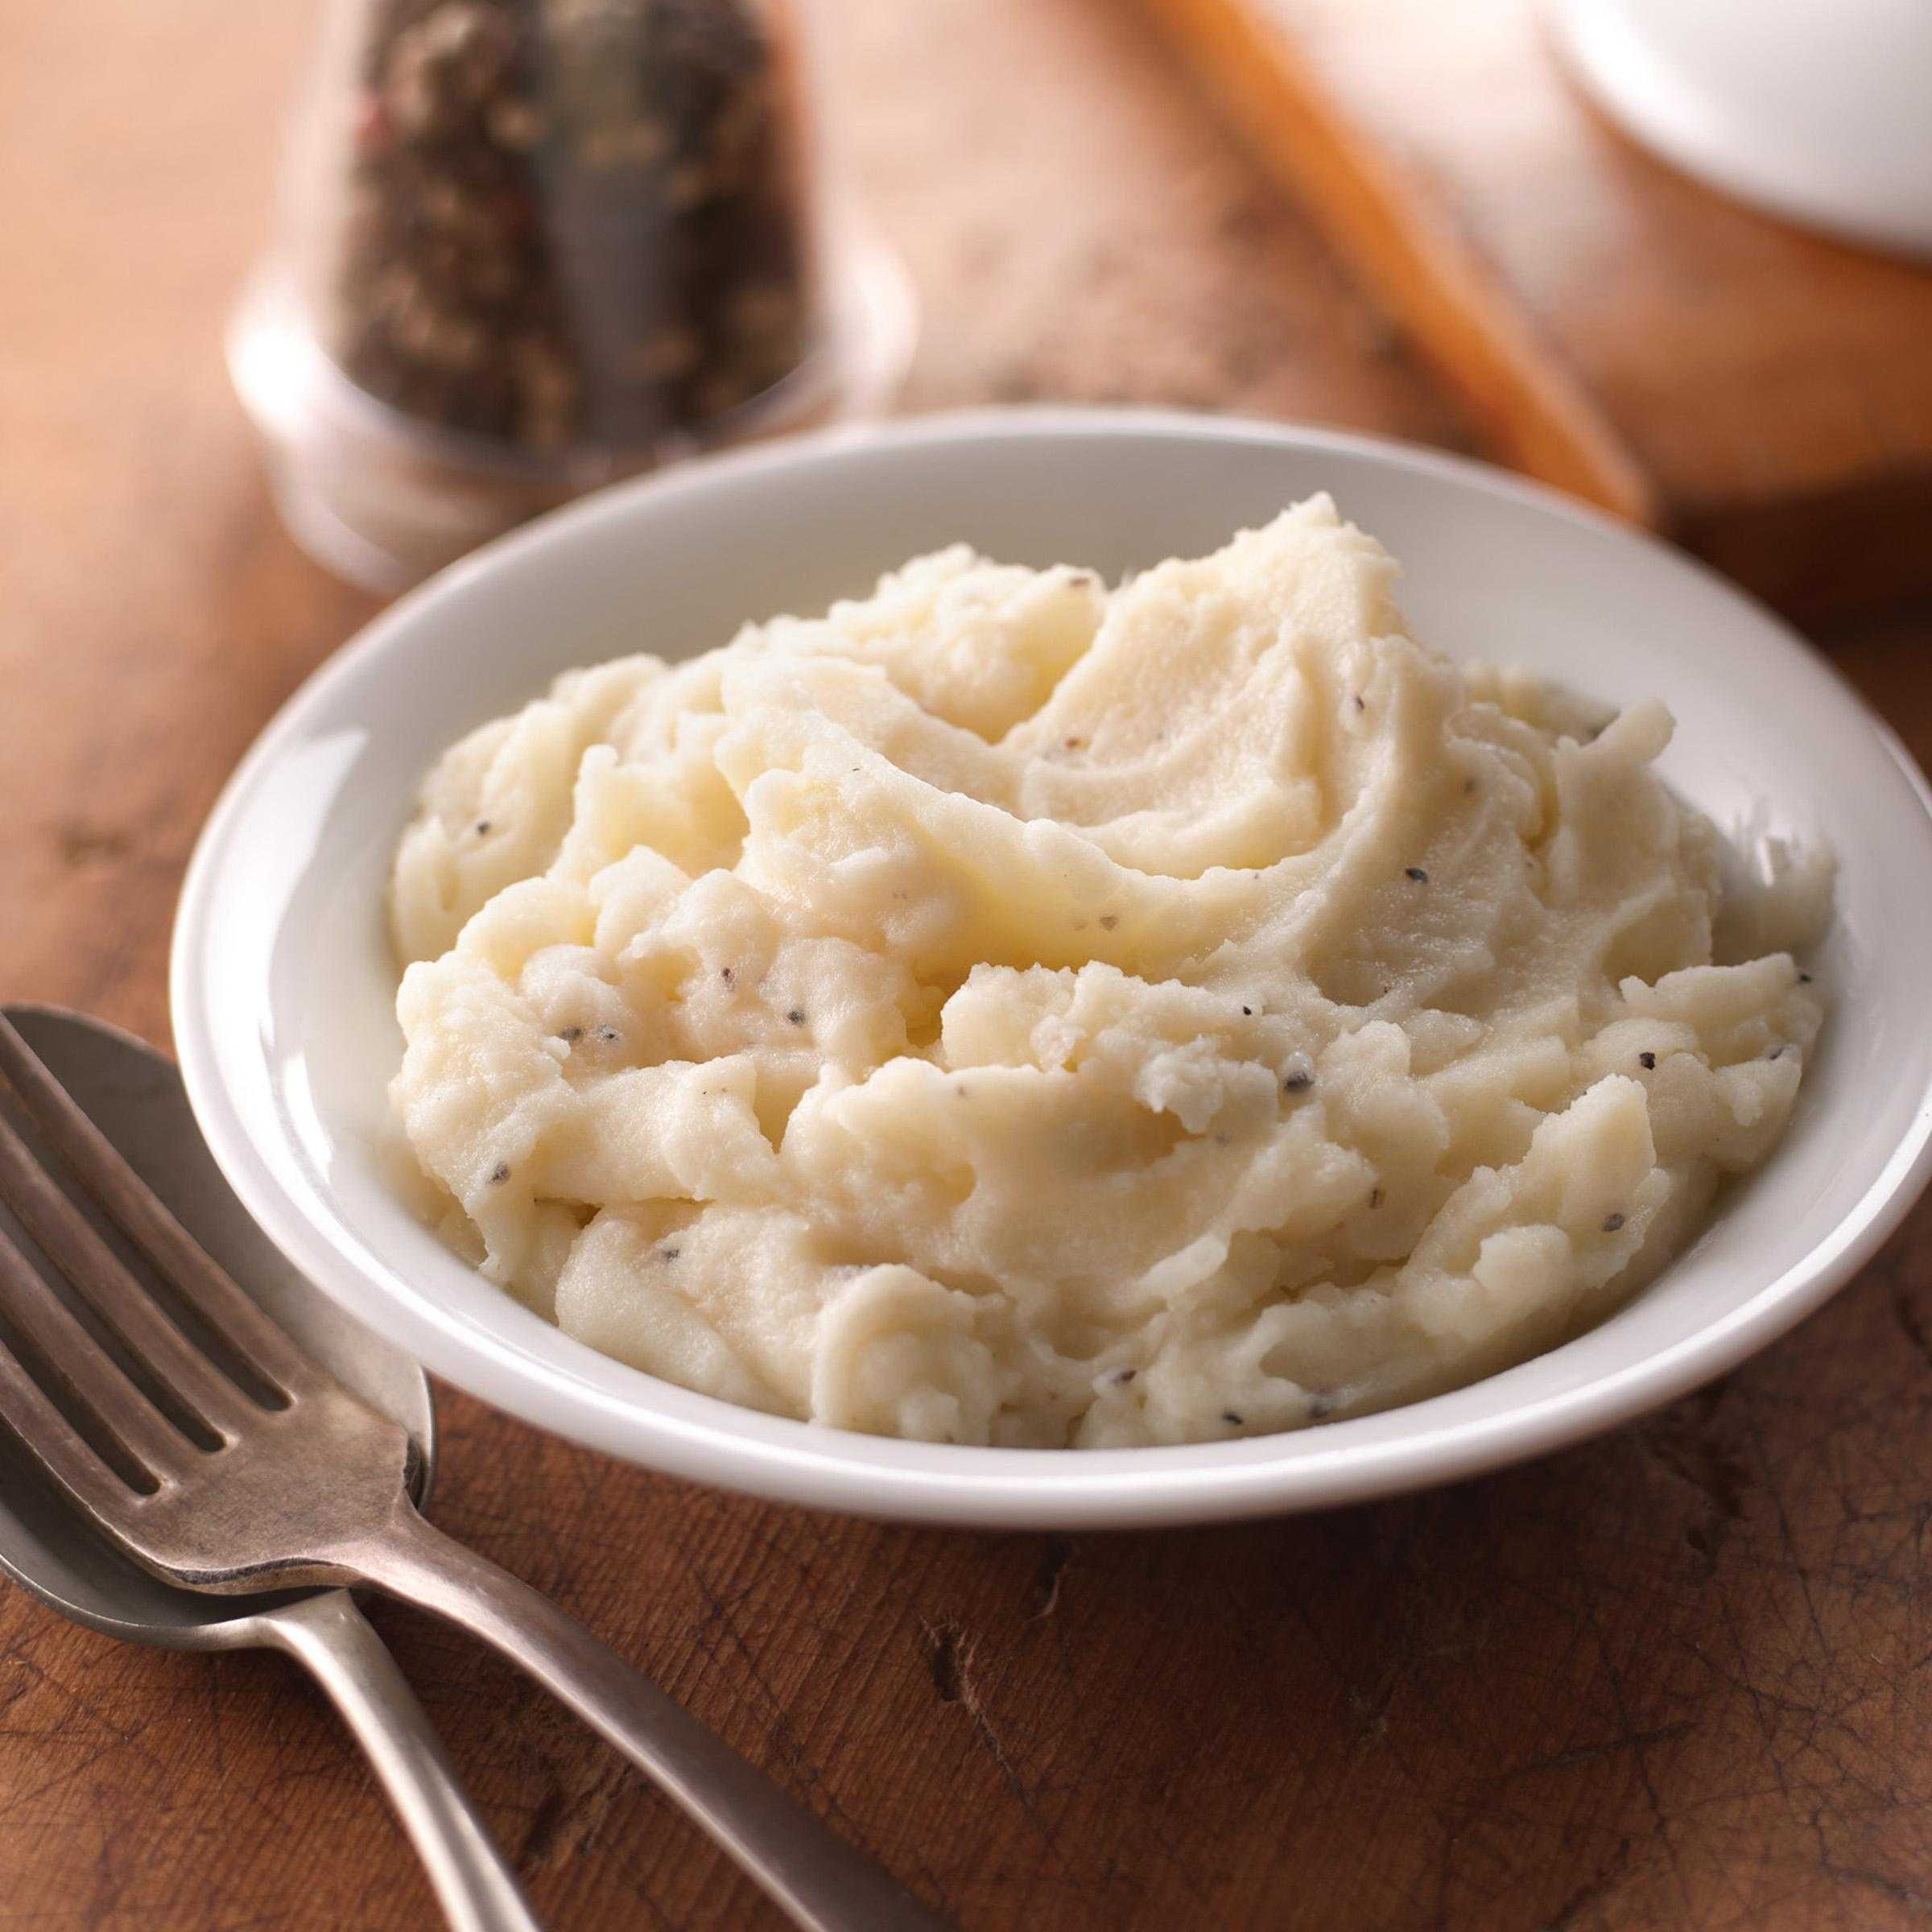 Simply Potatoes® Refrigerated Deluxe Mashed Potatoes made with peeled russet potatoes, 4/6 Lb Bags